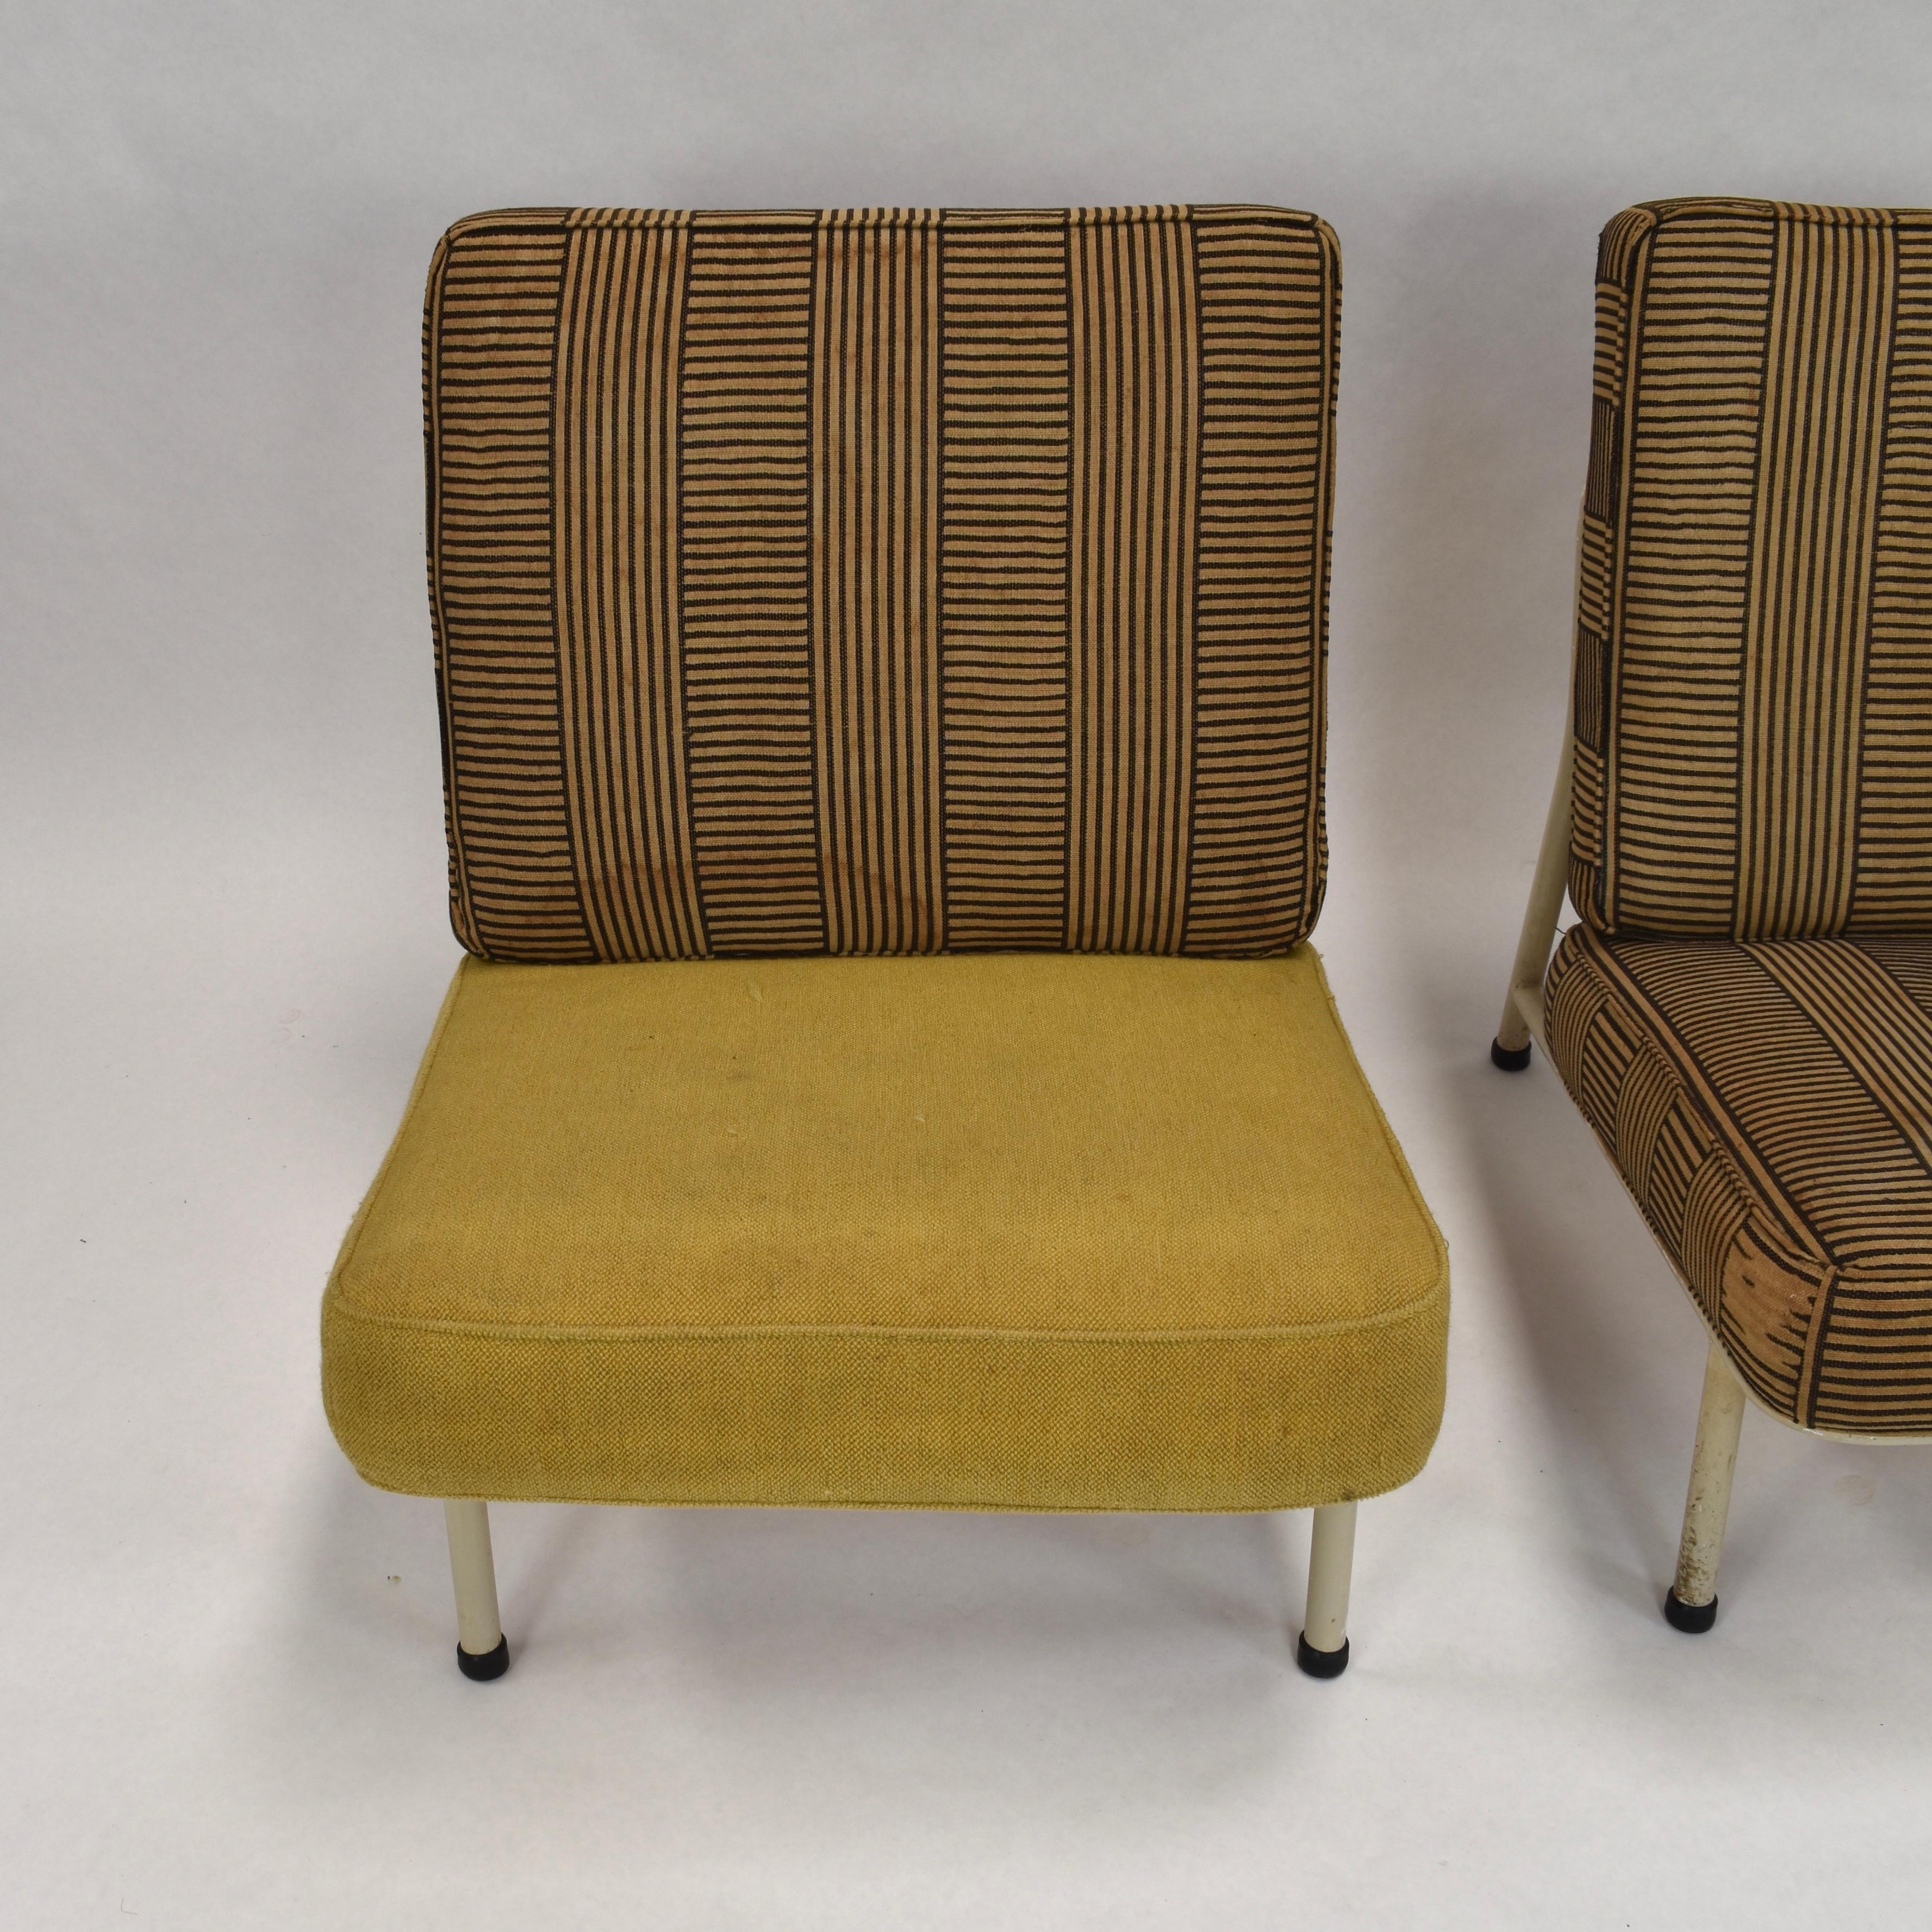 Metal Set of Three Alf Svensson Lounge Chairs for DUX, Sweden, circa 1950